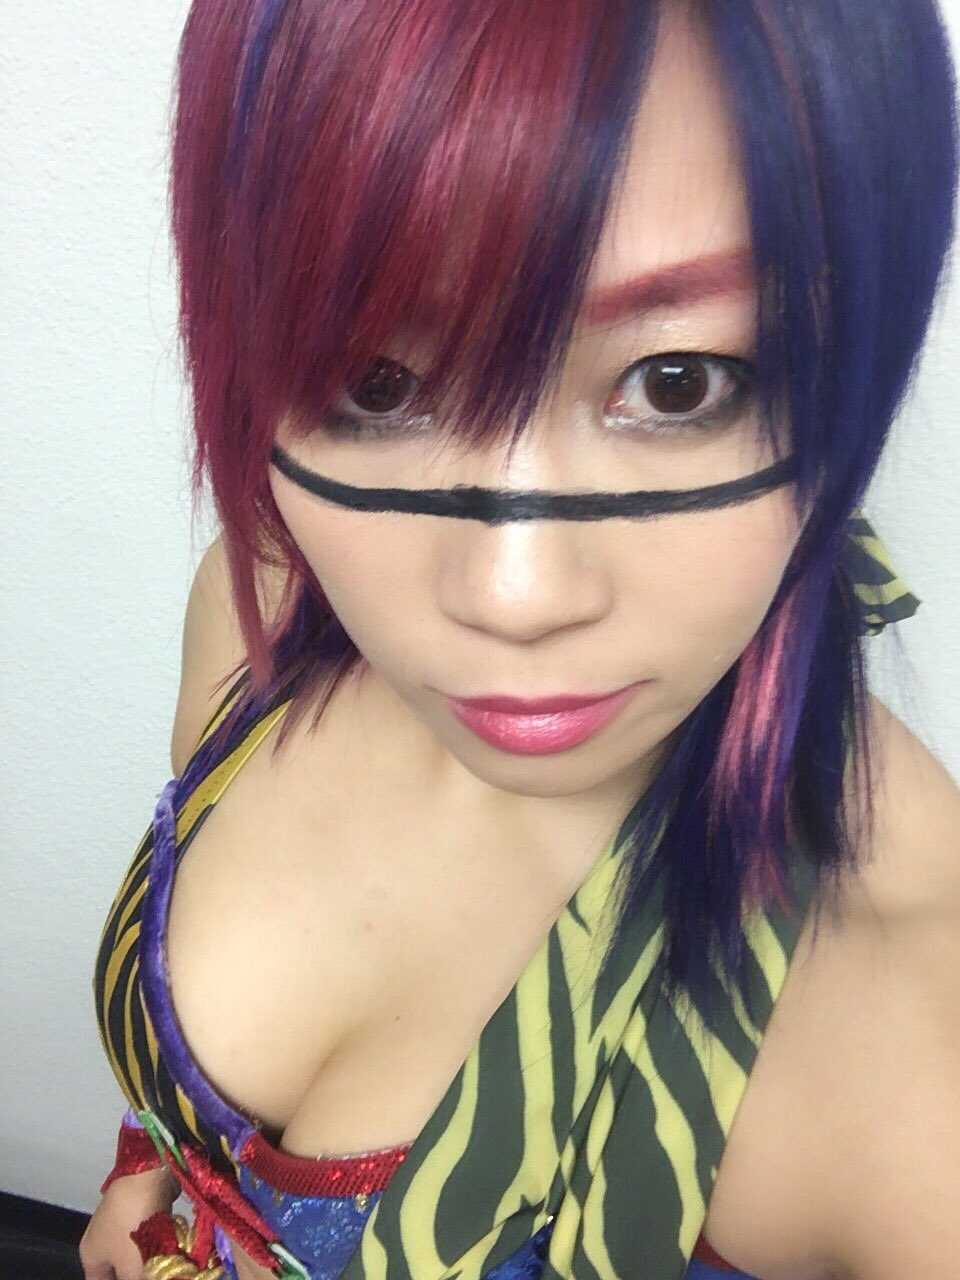 70+ Hot Pictures Of Asuka WWE Diva Unveil Her Fit Sexy Body 9